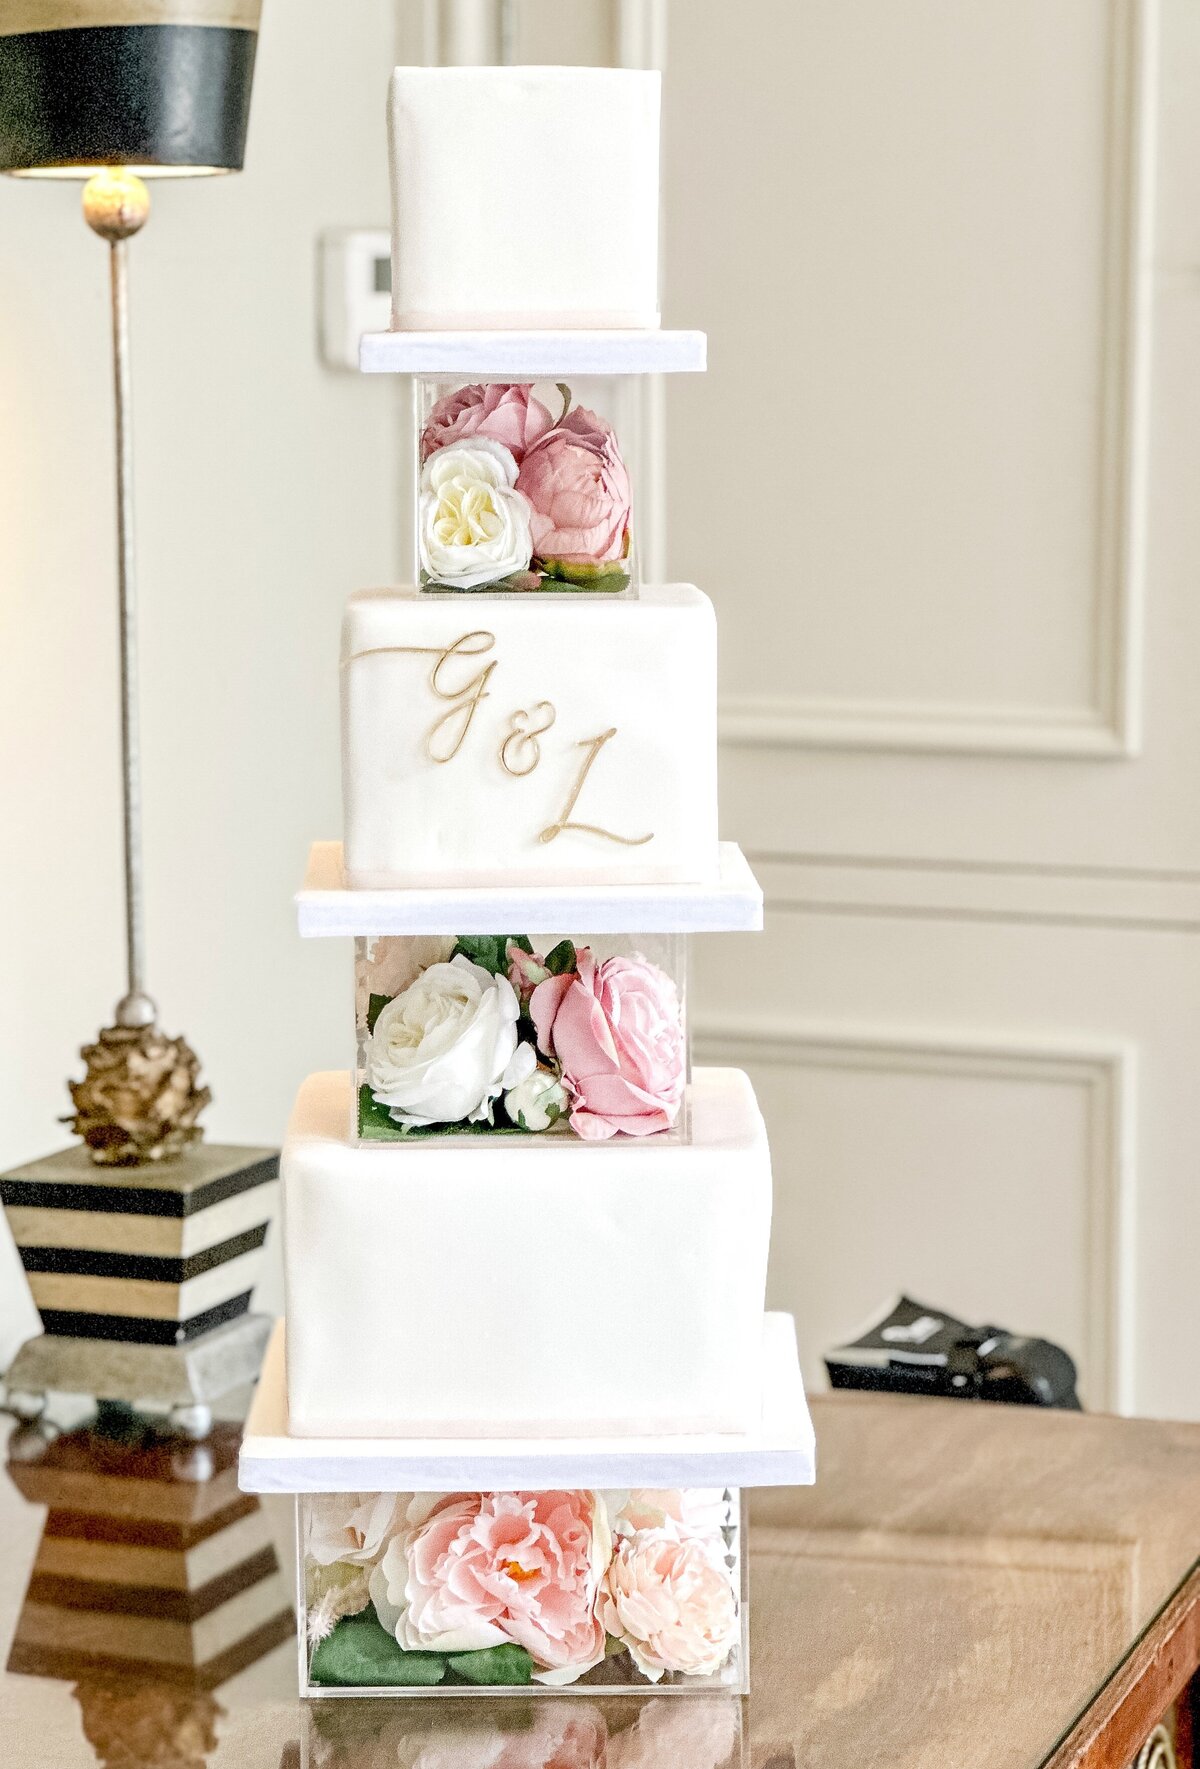 layers-graces-luxury-wedding-cake-square-iced-cake-prop-options-acrylic-tiers